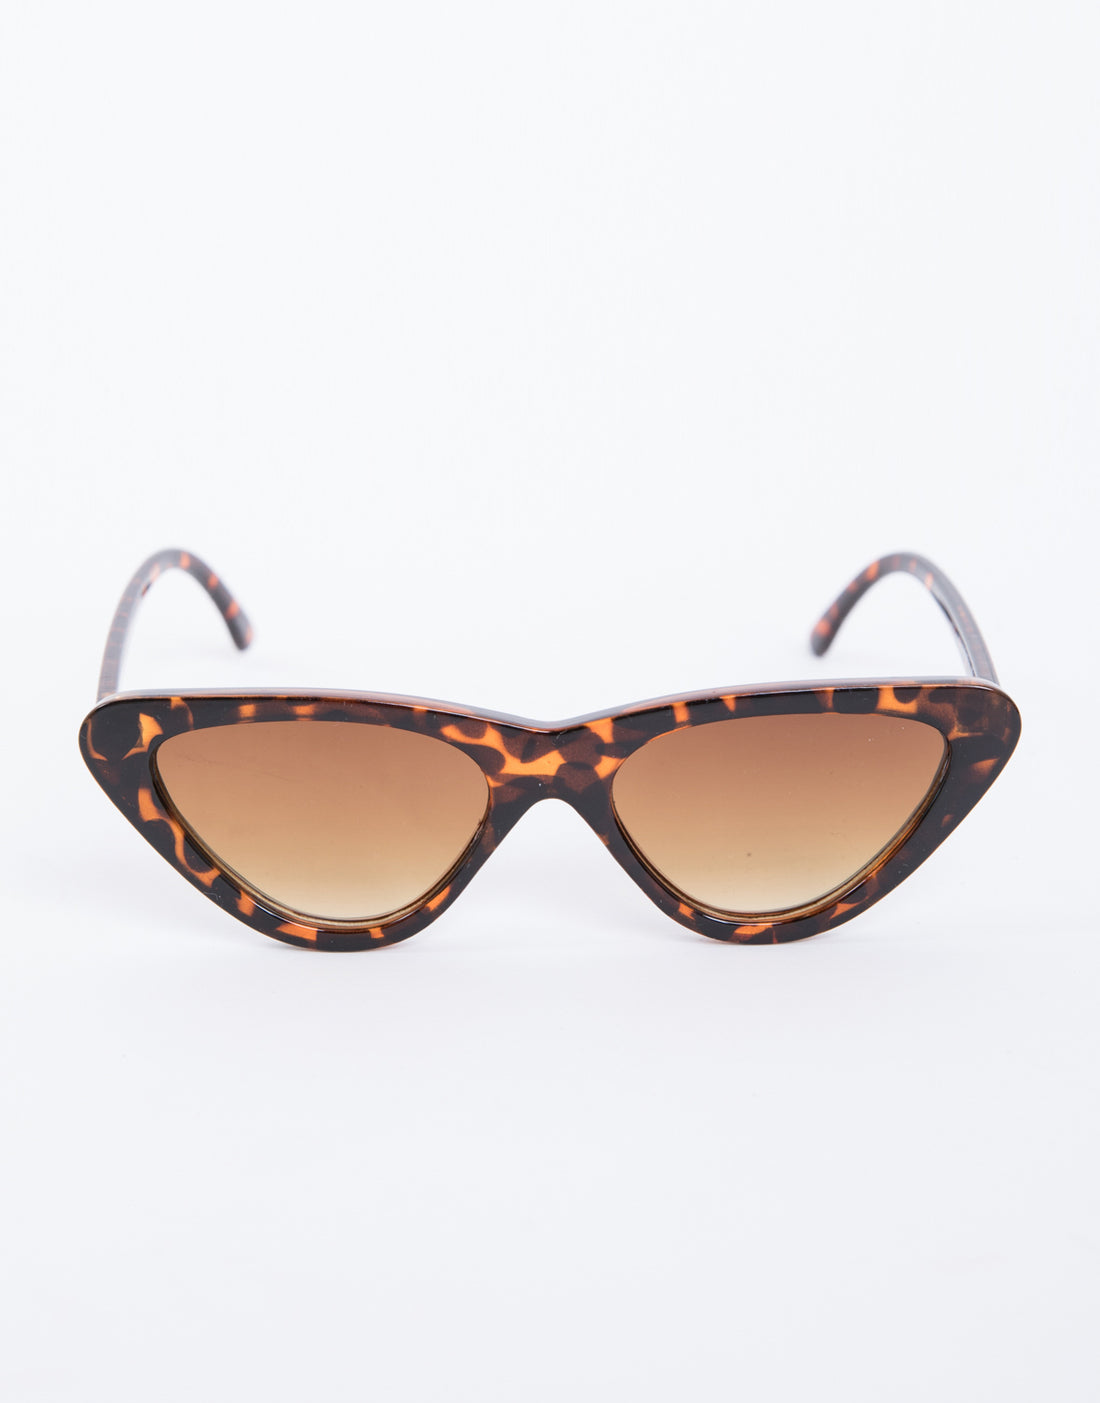 Center Of Attention Sunglasses Accessories Tortoise One Size -2020AVE